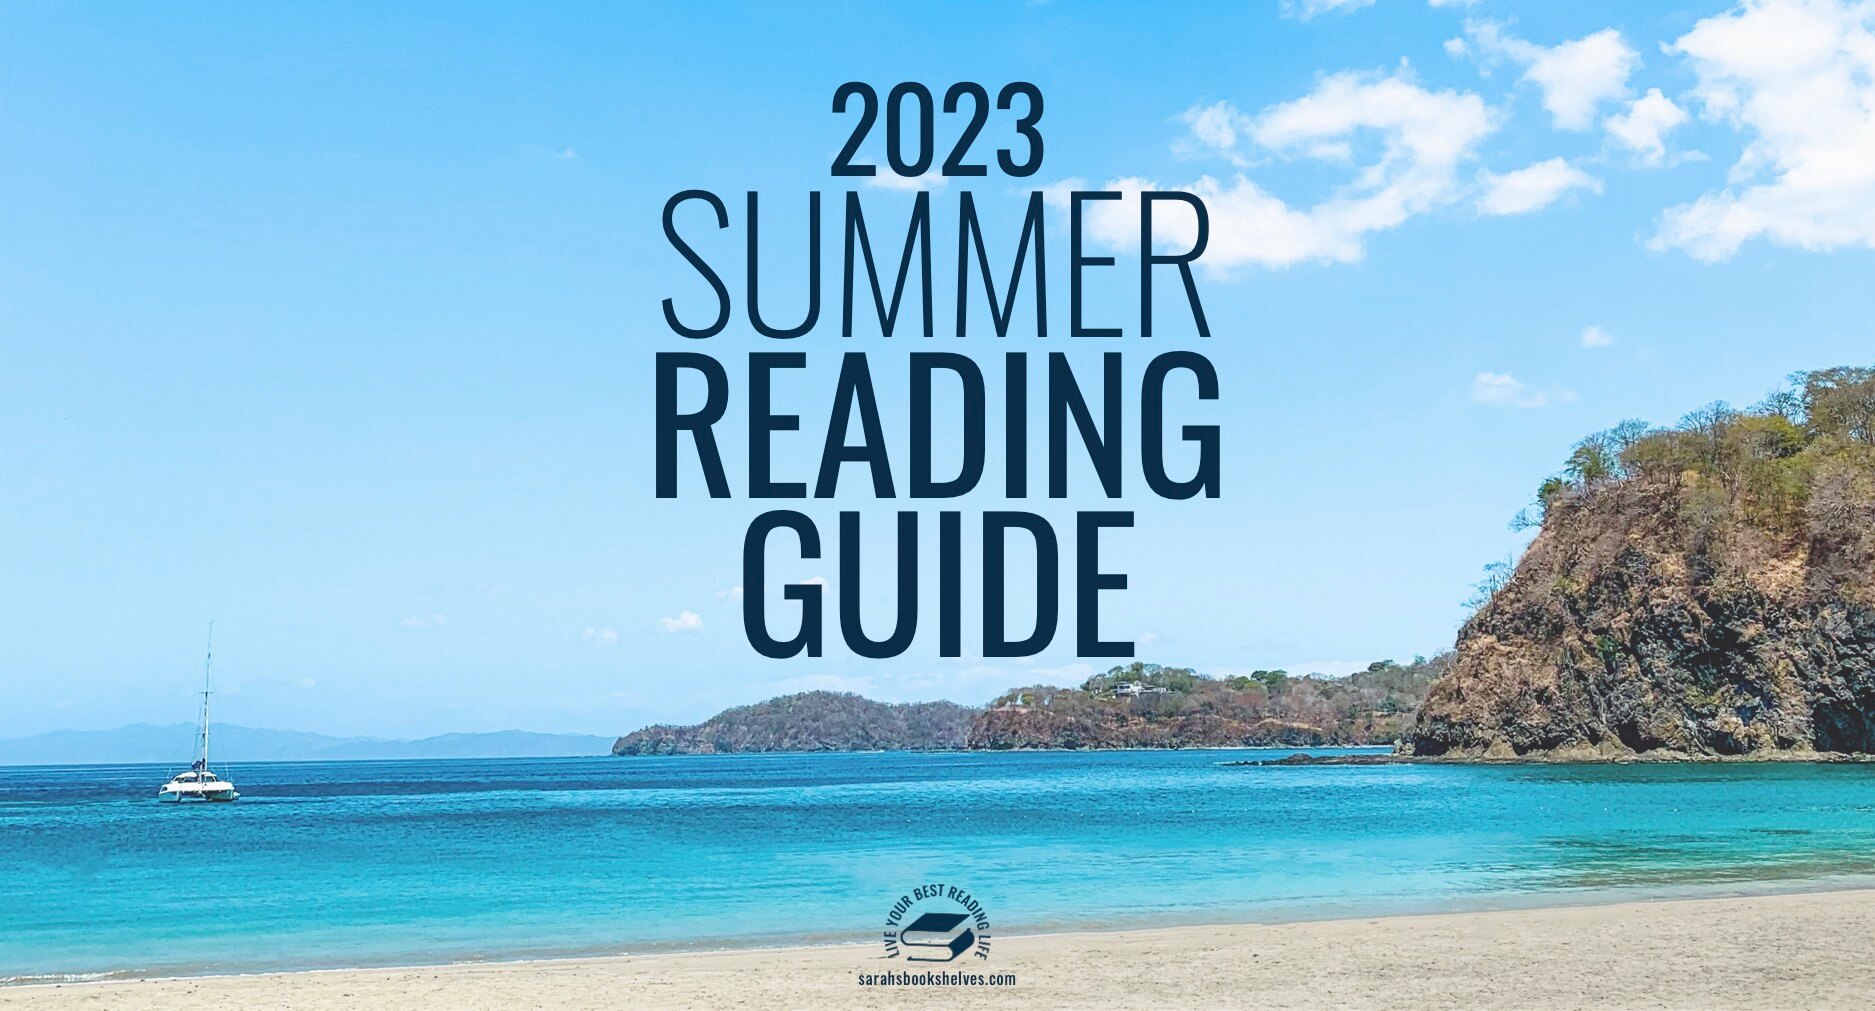 2023 Summer Reading Guide